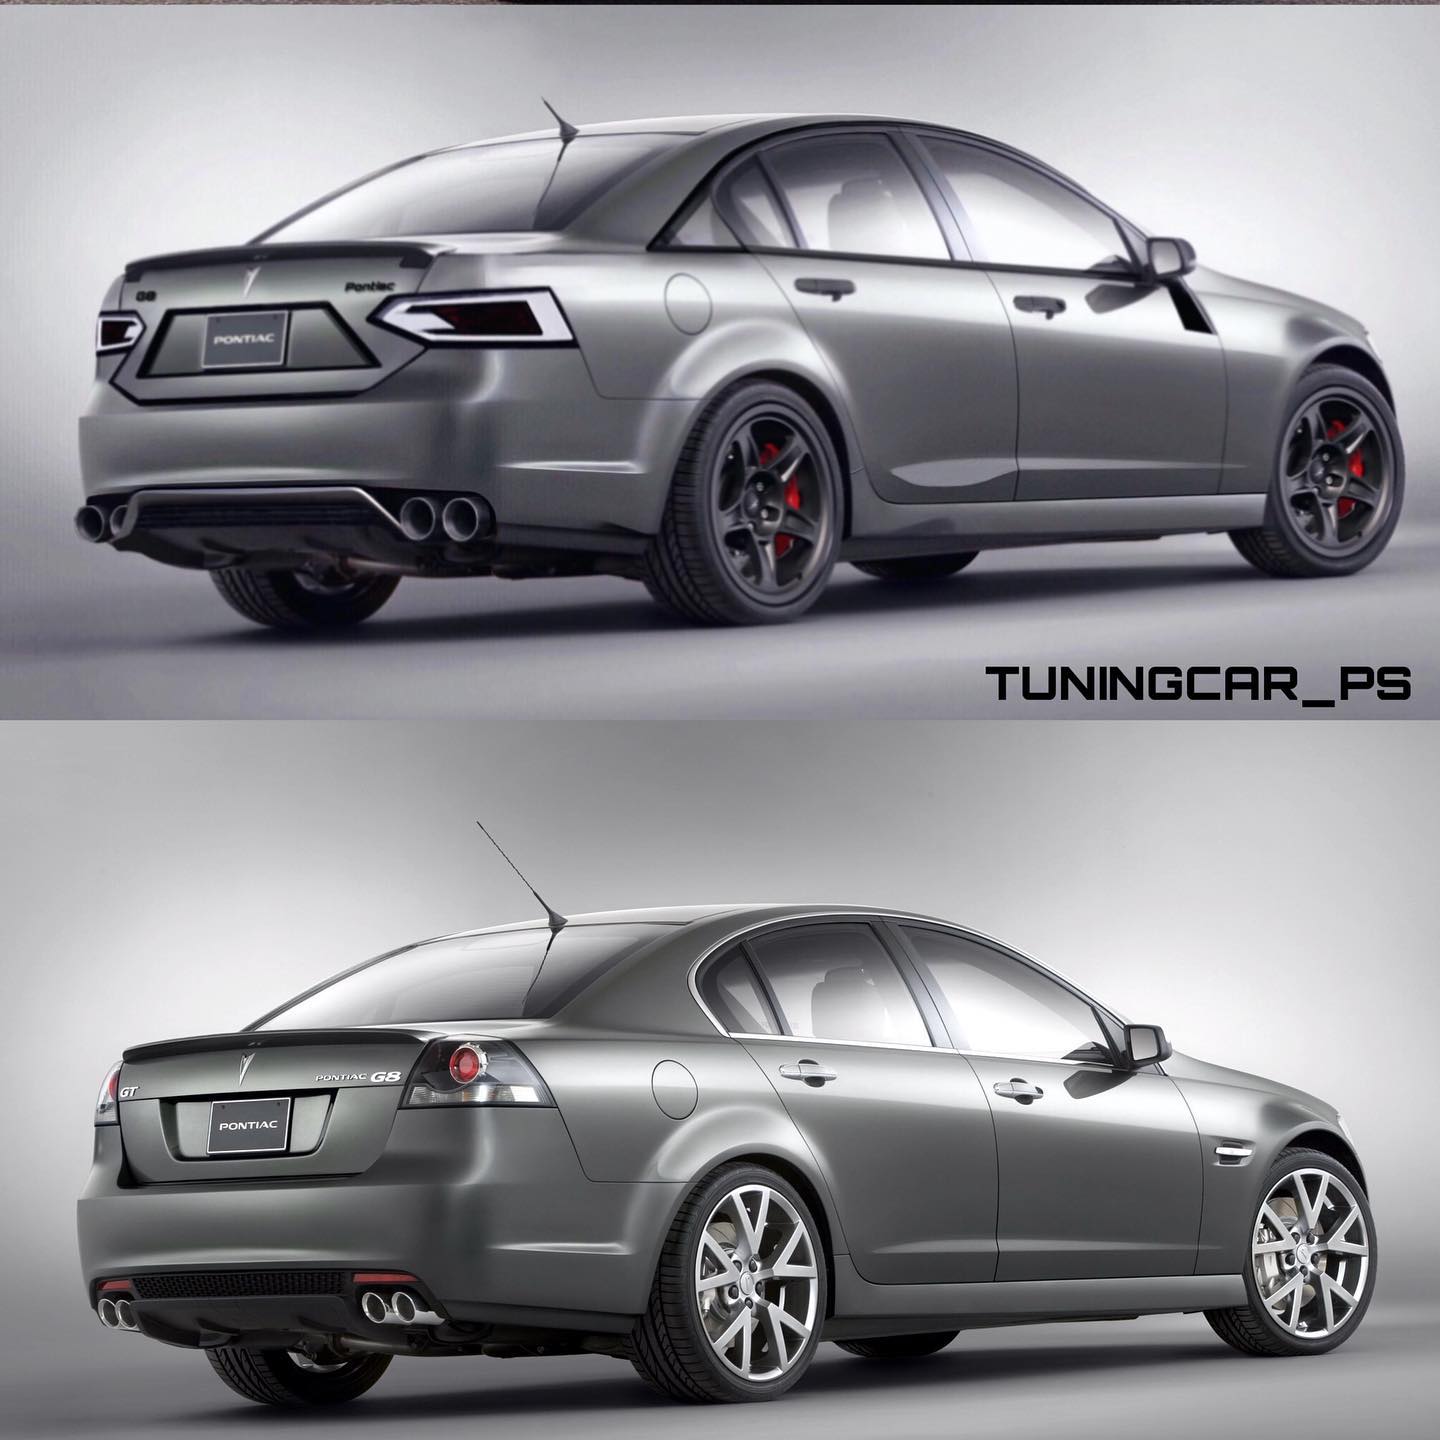 2025 Pontiac G8 Imaginatively Returns From the Dead With a Mighty V10